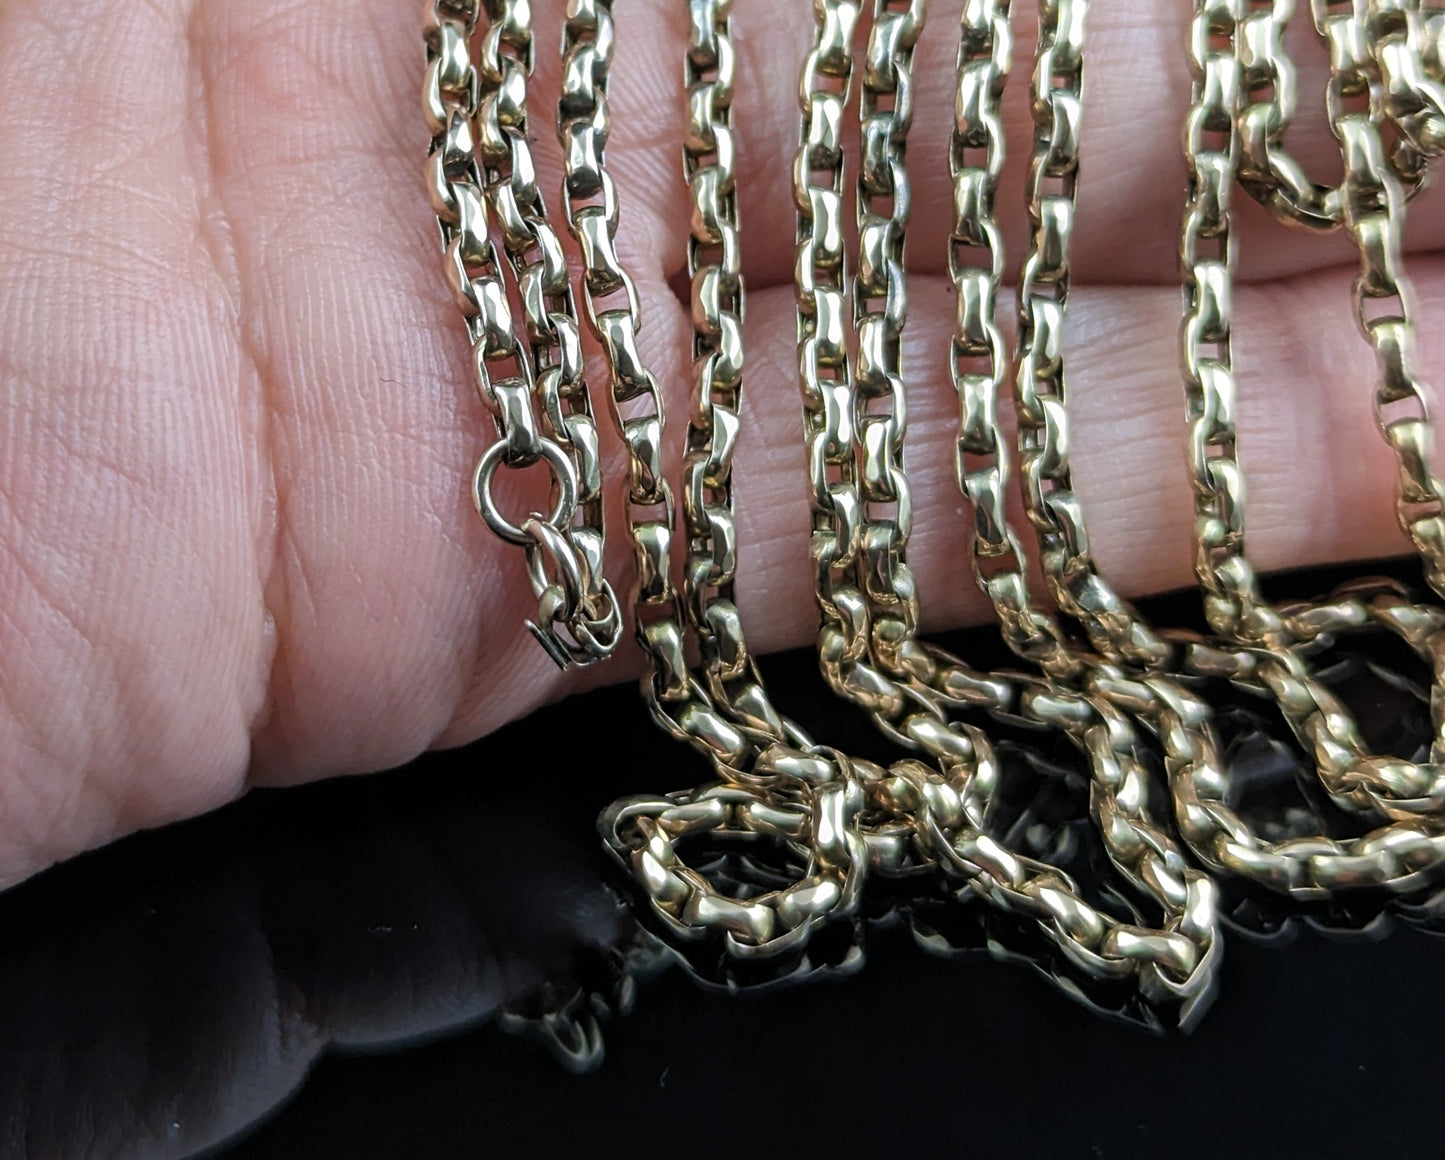 Antique 9ct gold longuard chain necklace, muff chain, Victorian